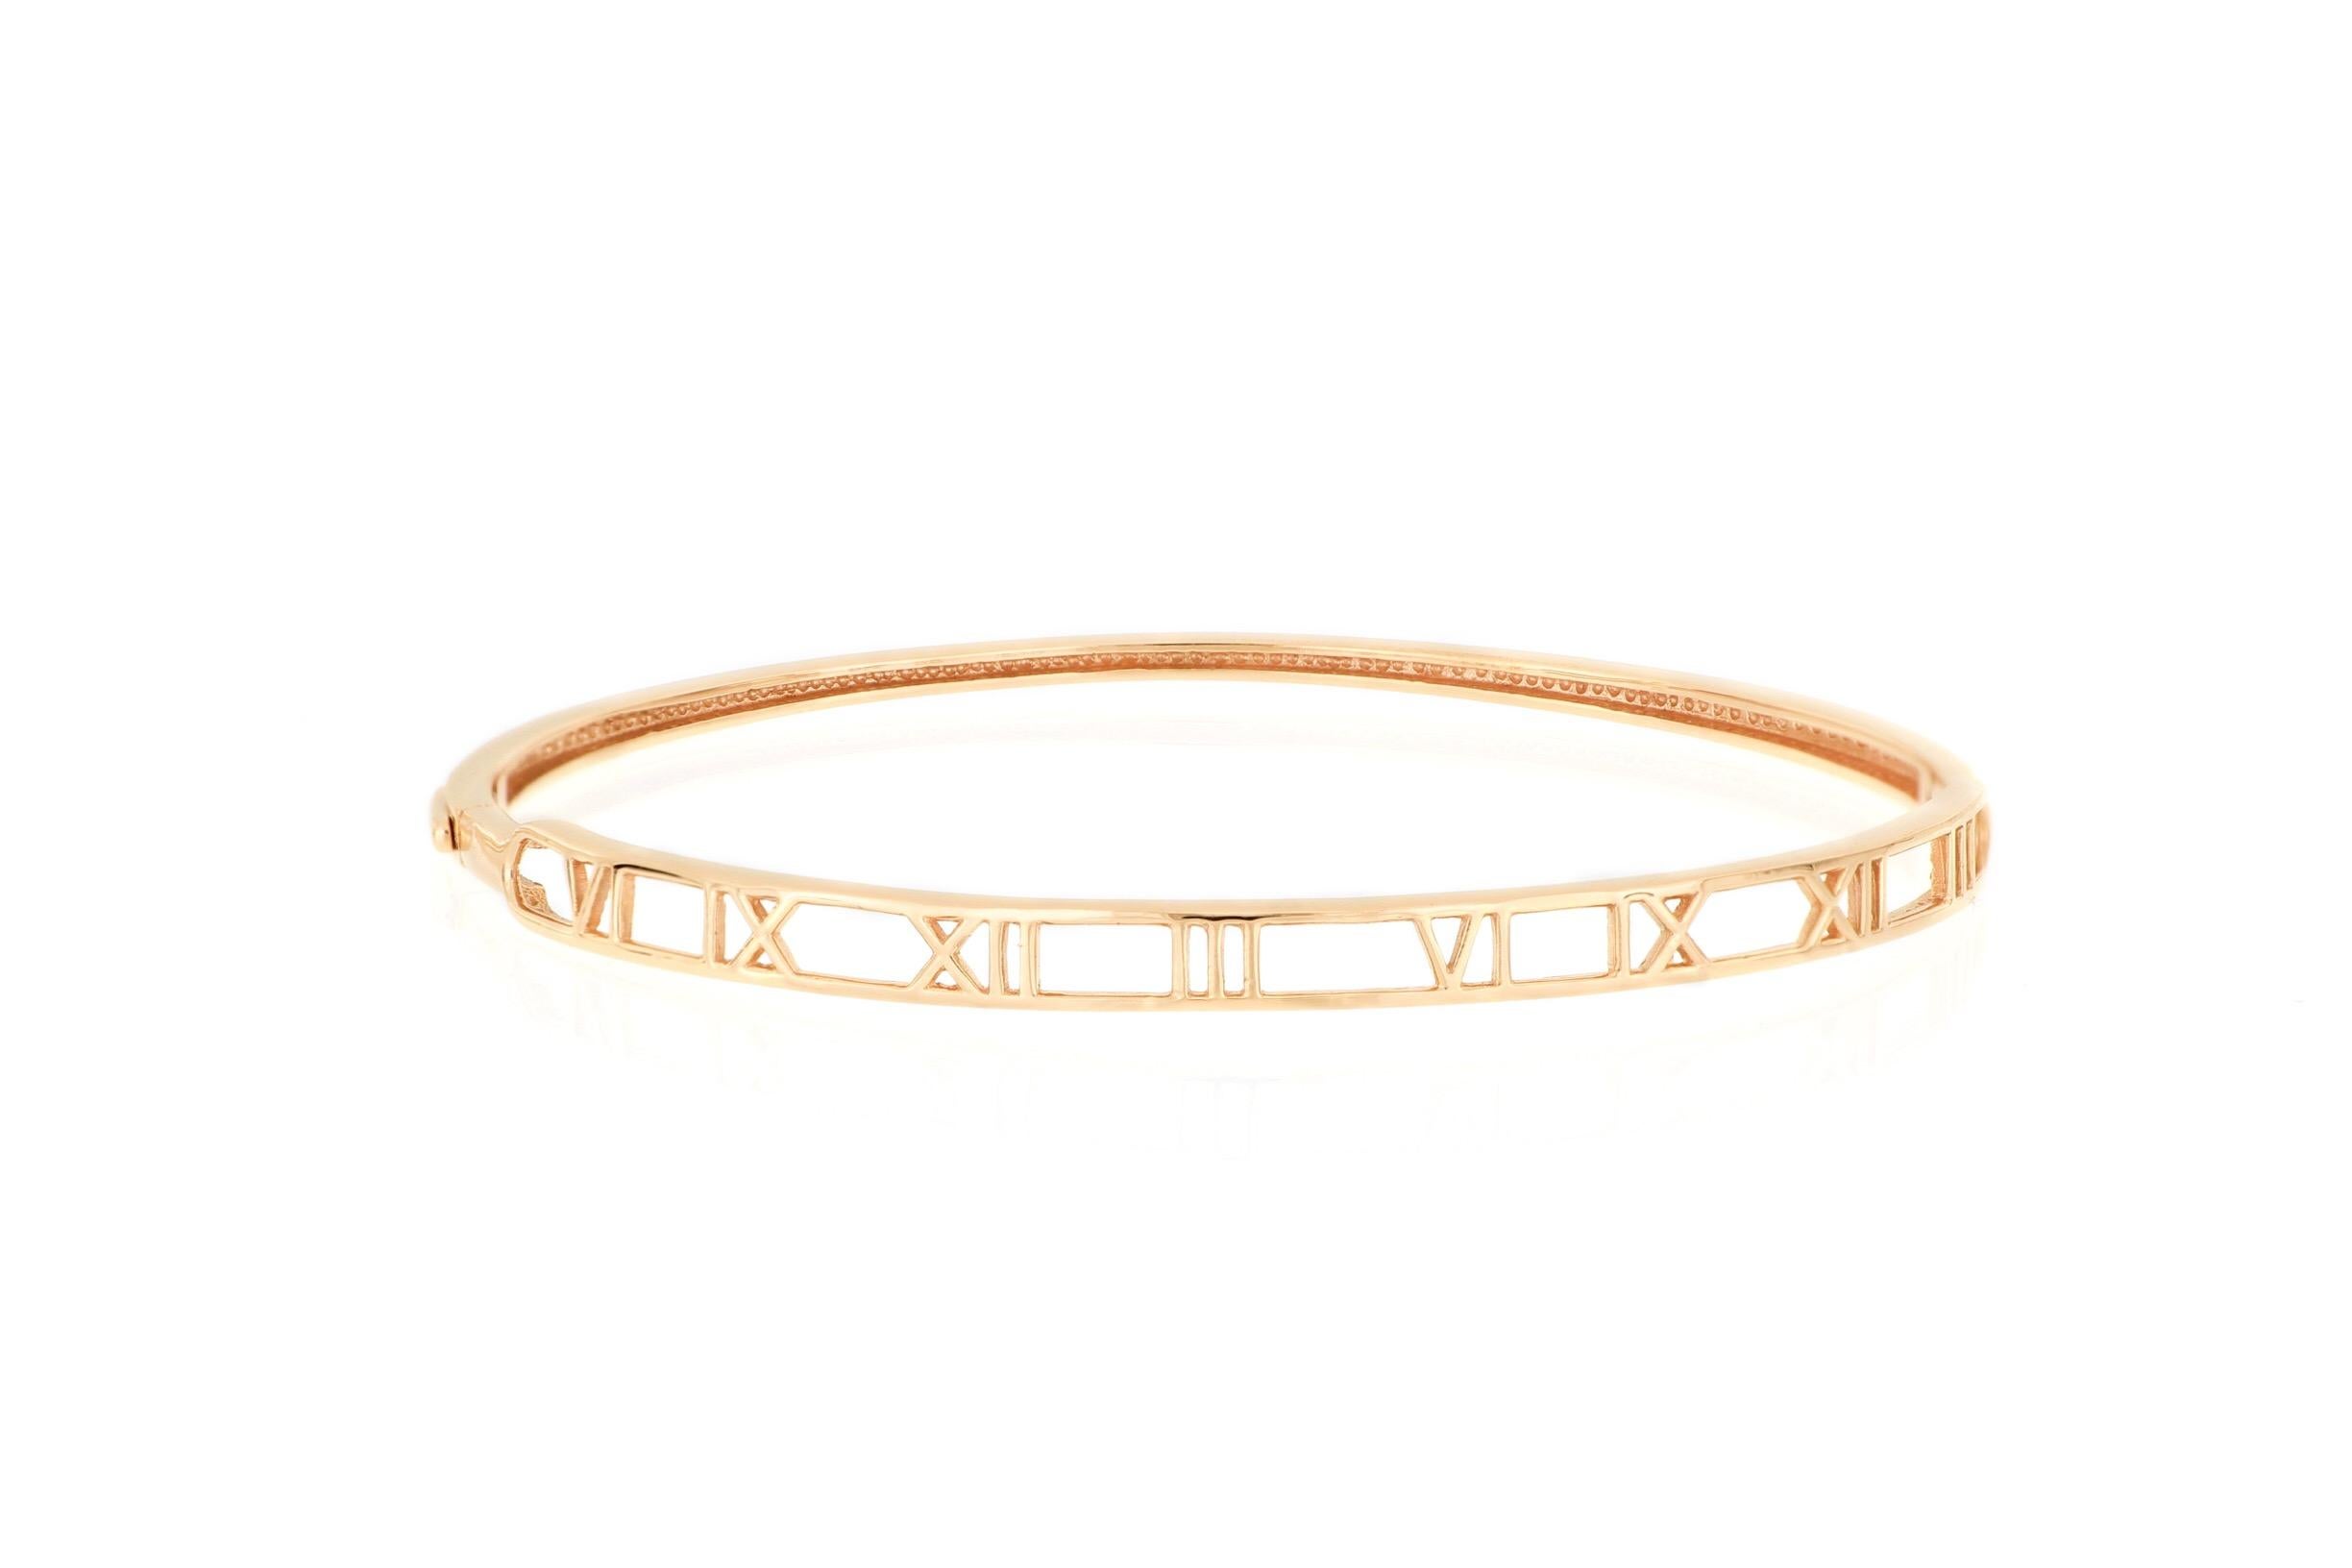 A stylish bangle in 18K rose gold featuring Roman numerals. This is a very nice piece of casual jewellery which can be worn daily, matching different cloths and outfits.
The company was founded one and a half centuries ago in Macau. The brand is